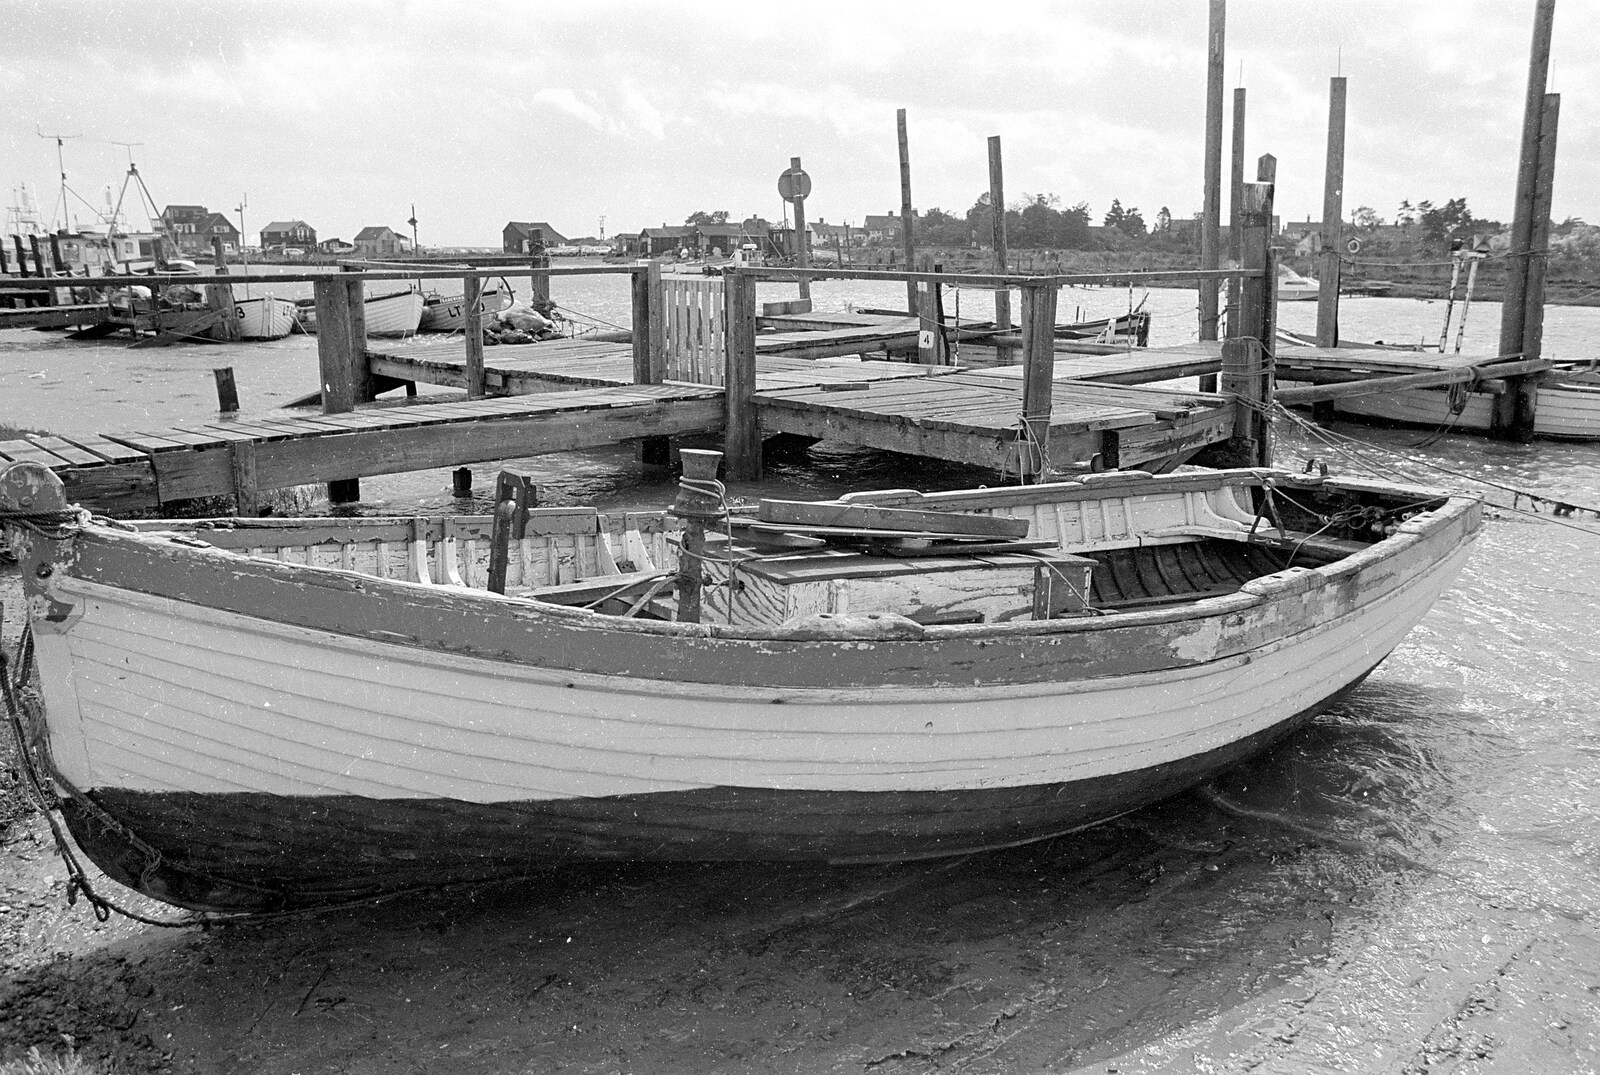 Another tired fishing boat from Blackshore Quay in Black and White, Southwold and Sizewell, Suffolk - 16th September 1992